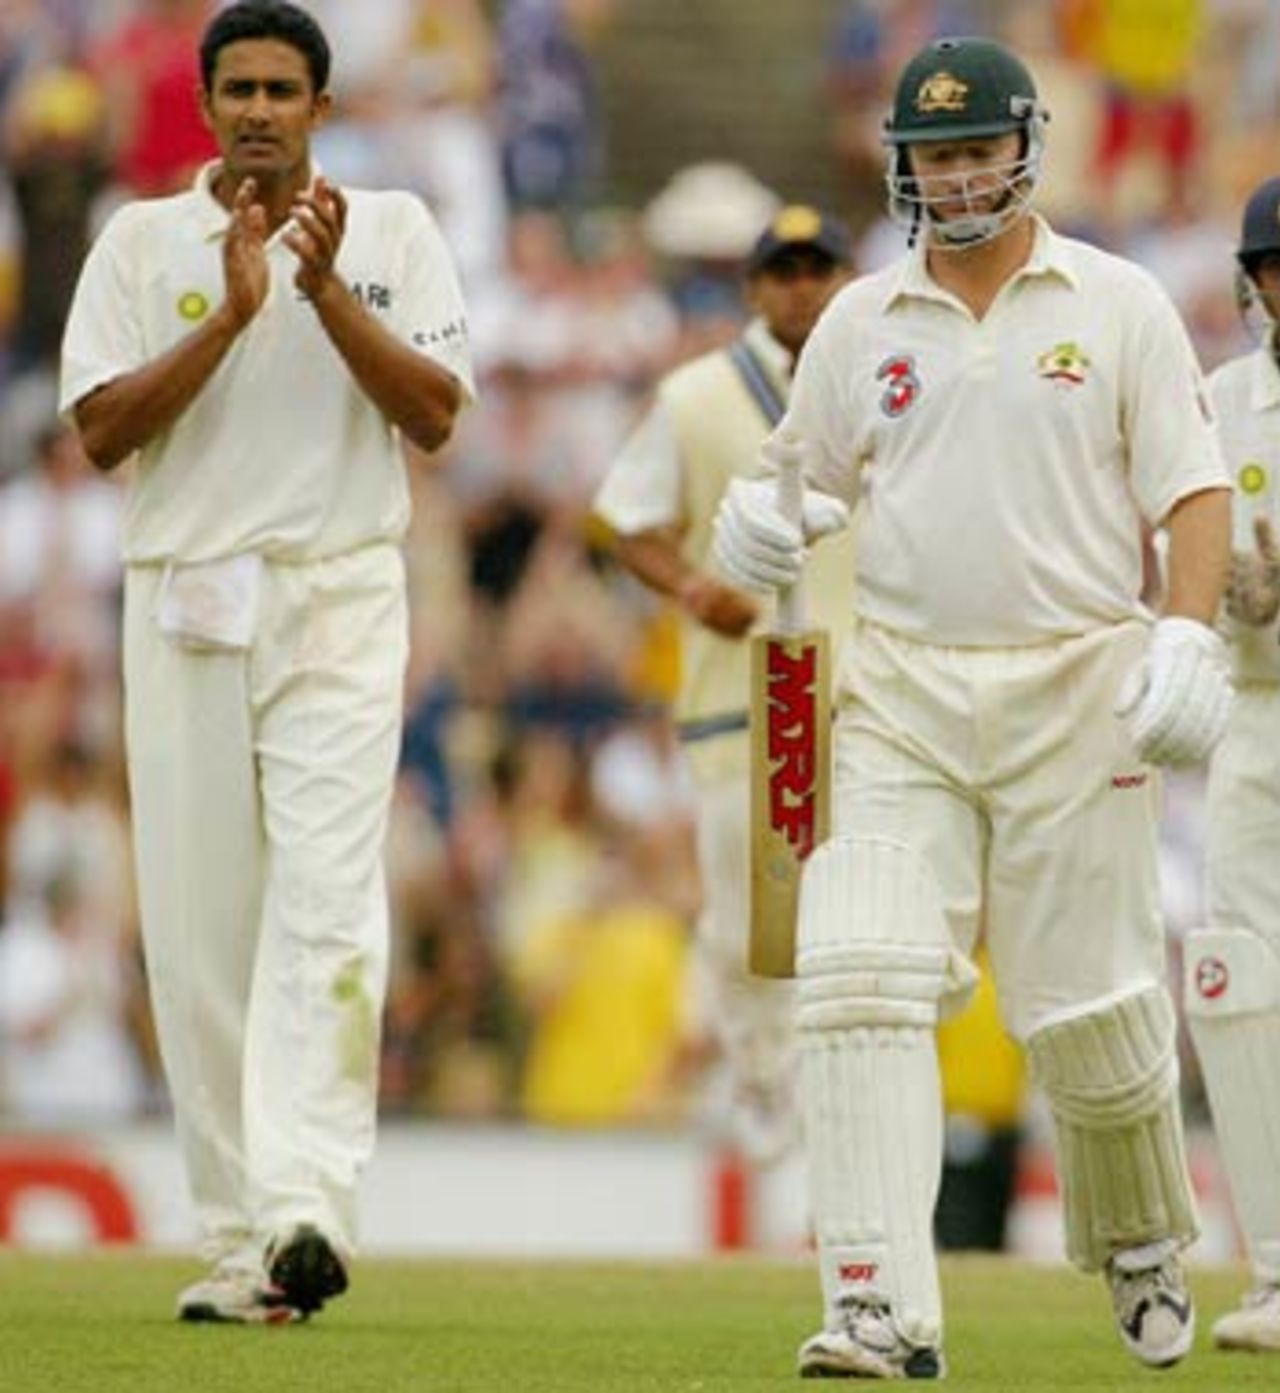 From one ageing warrior to another, Anil Kumble claps Steve Waugh off, Australia v India, 4th Test, Sydney, 5th day, January 6, 2004